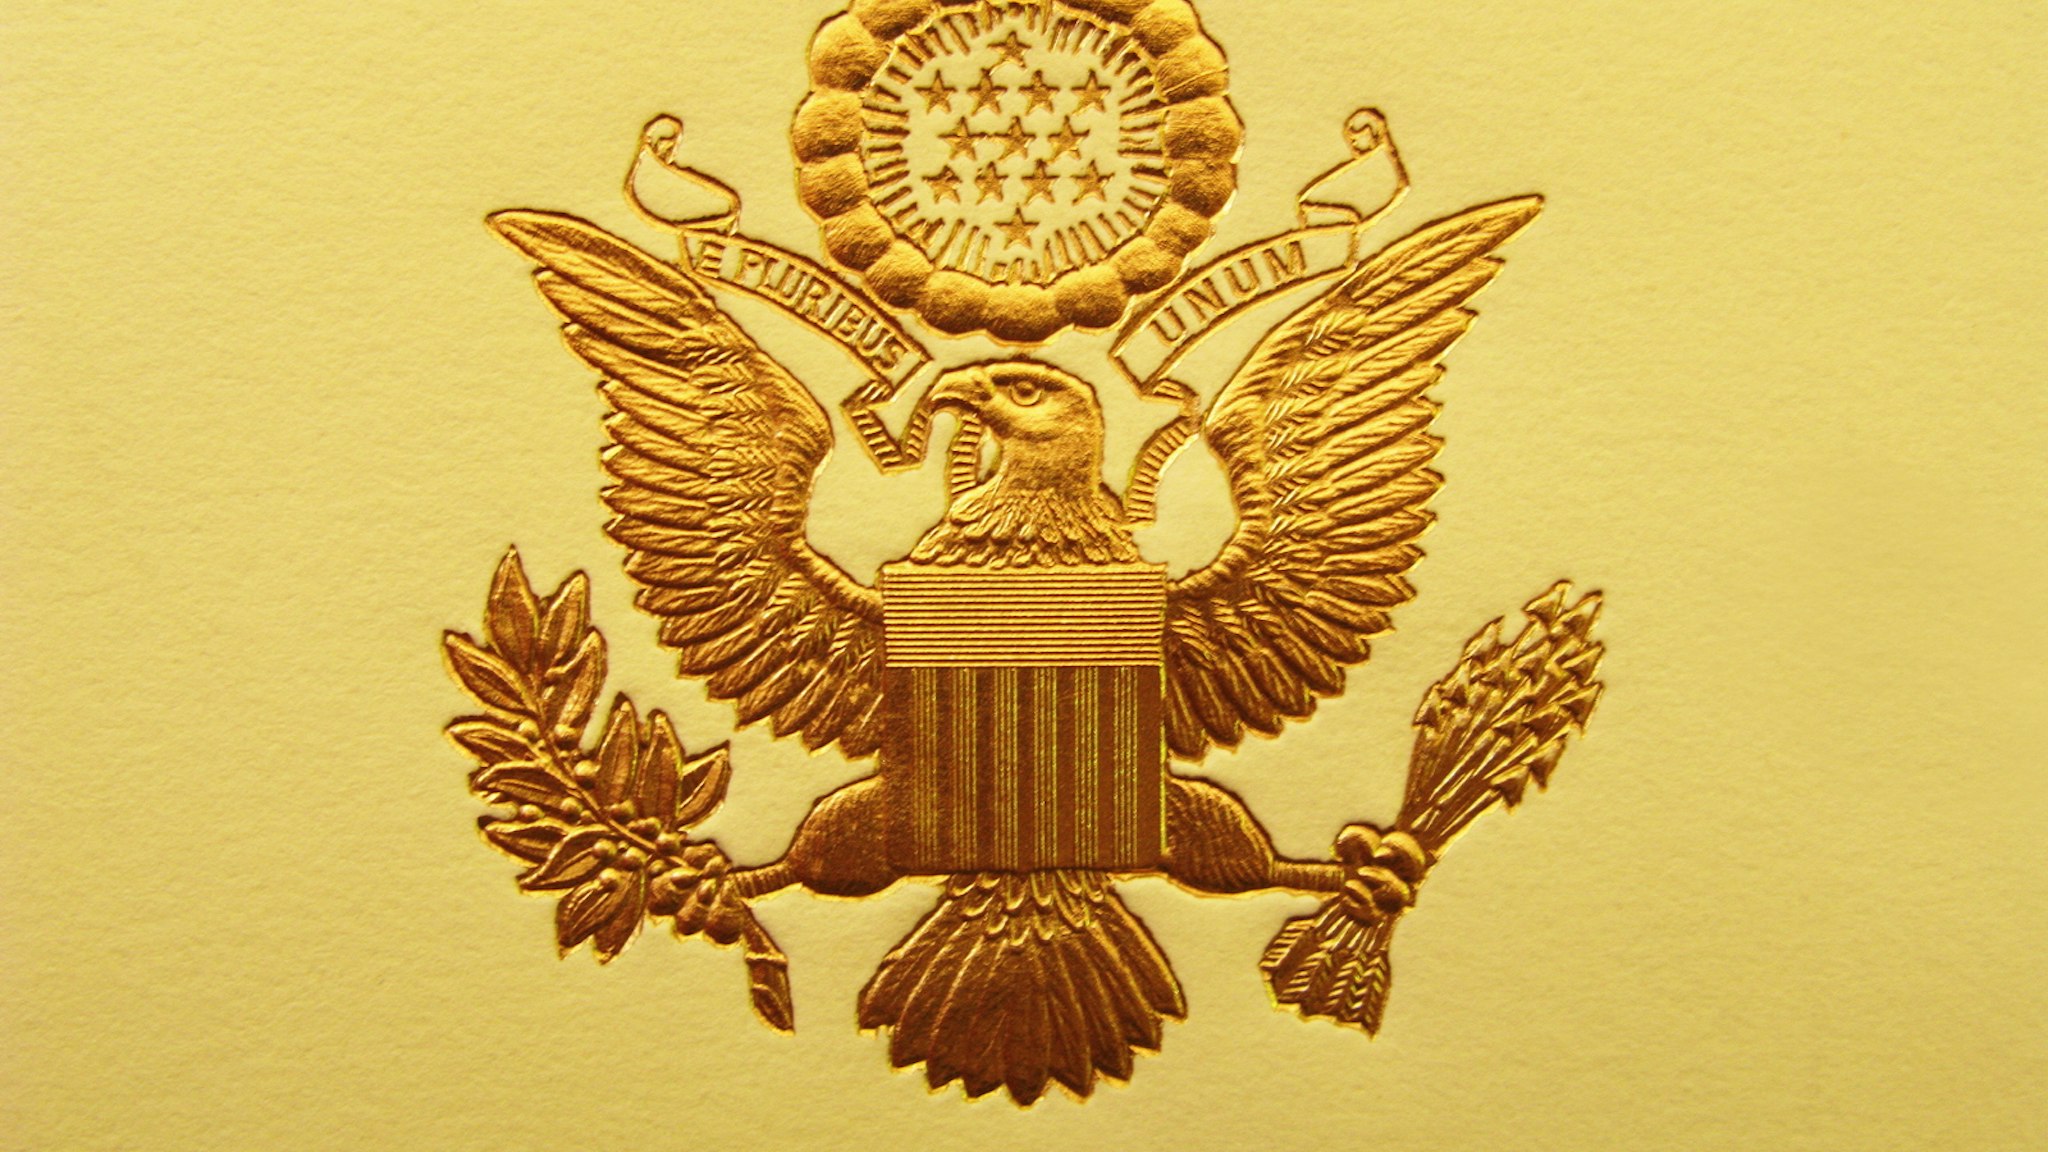 The Seal of the President of the United States is used to mark correspondence from the U.S. president to the United States Congress, and is also used as a symbol of the presidency.